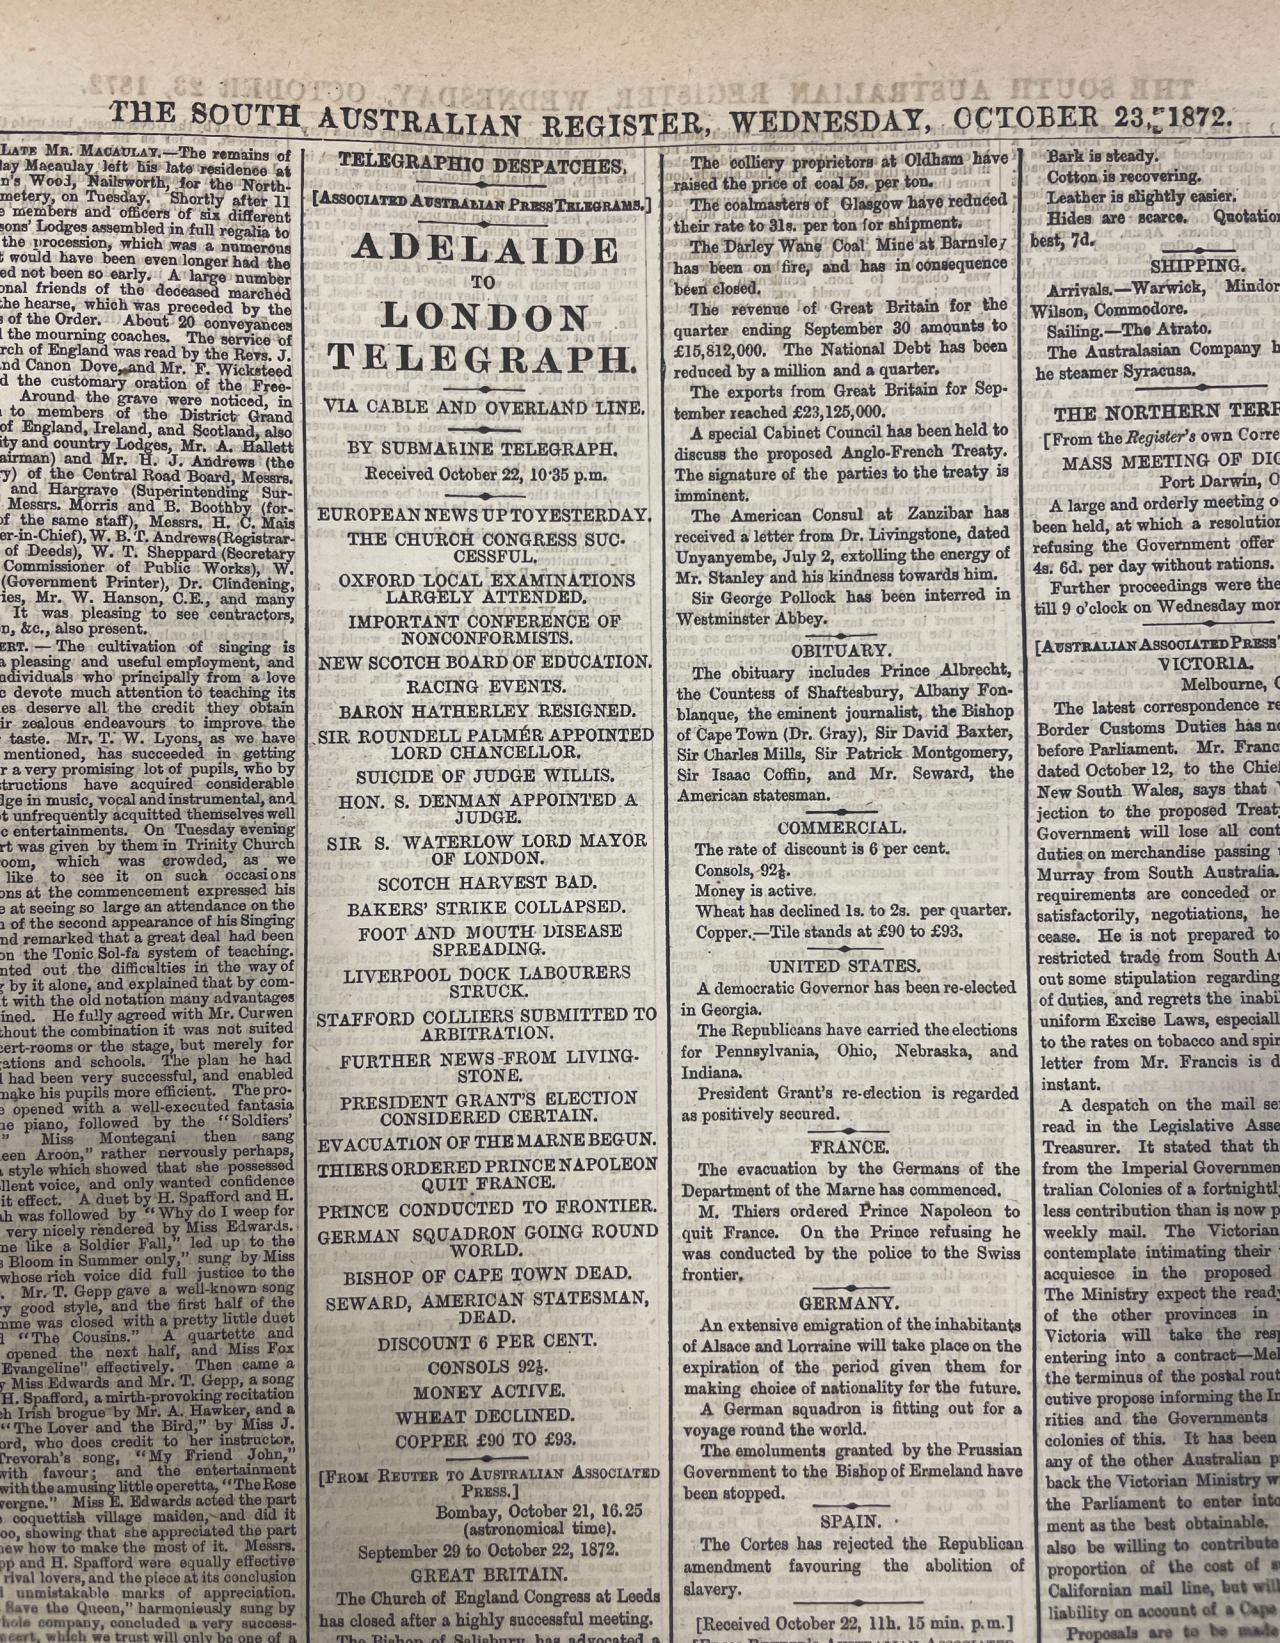 Photo of a section of page 5 of the The SA Register newspaper, that features a copy of the first telegram sent from Adelaide to London via the Overland Telegraph Line on 21 October 1972